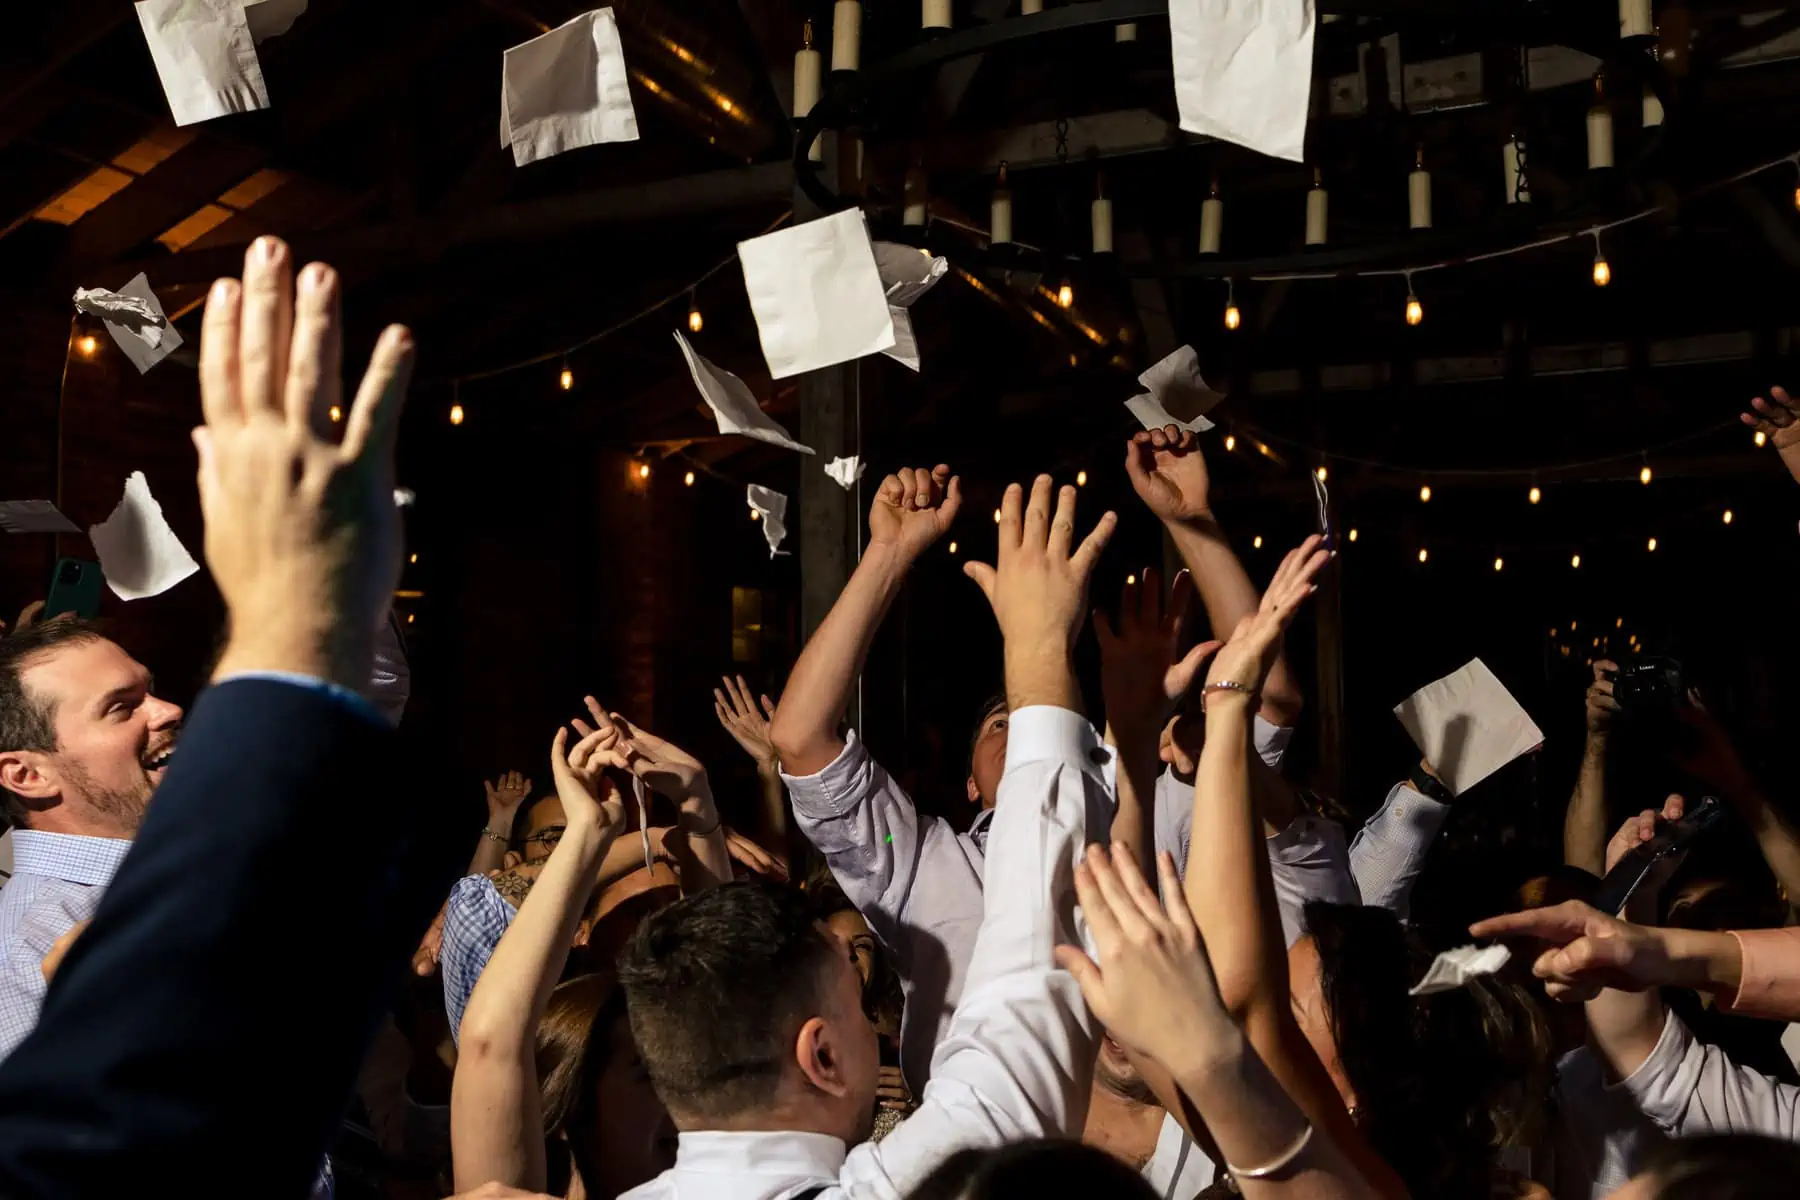 A group of people throwing paper into the air at a wedding reception.